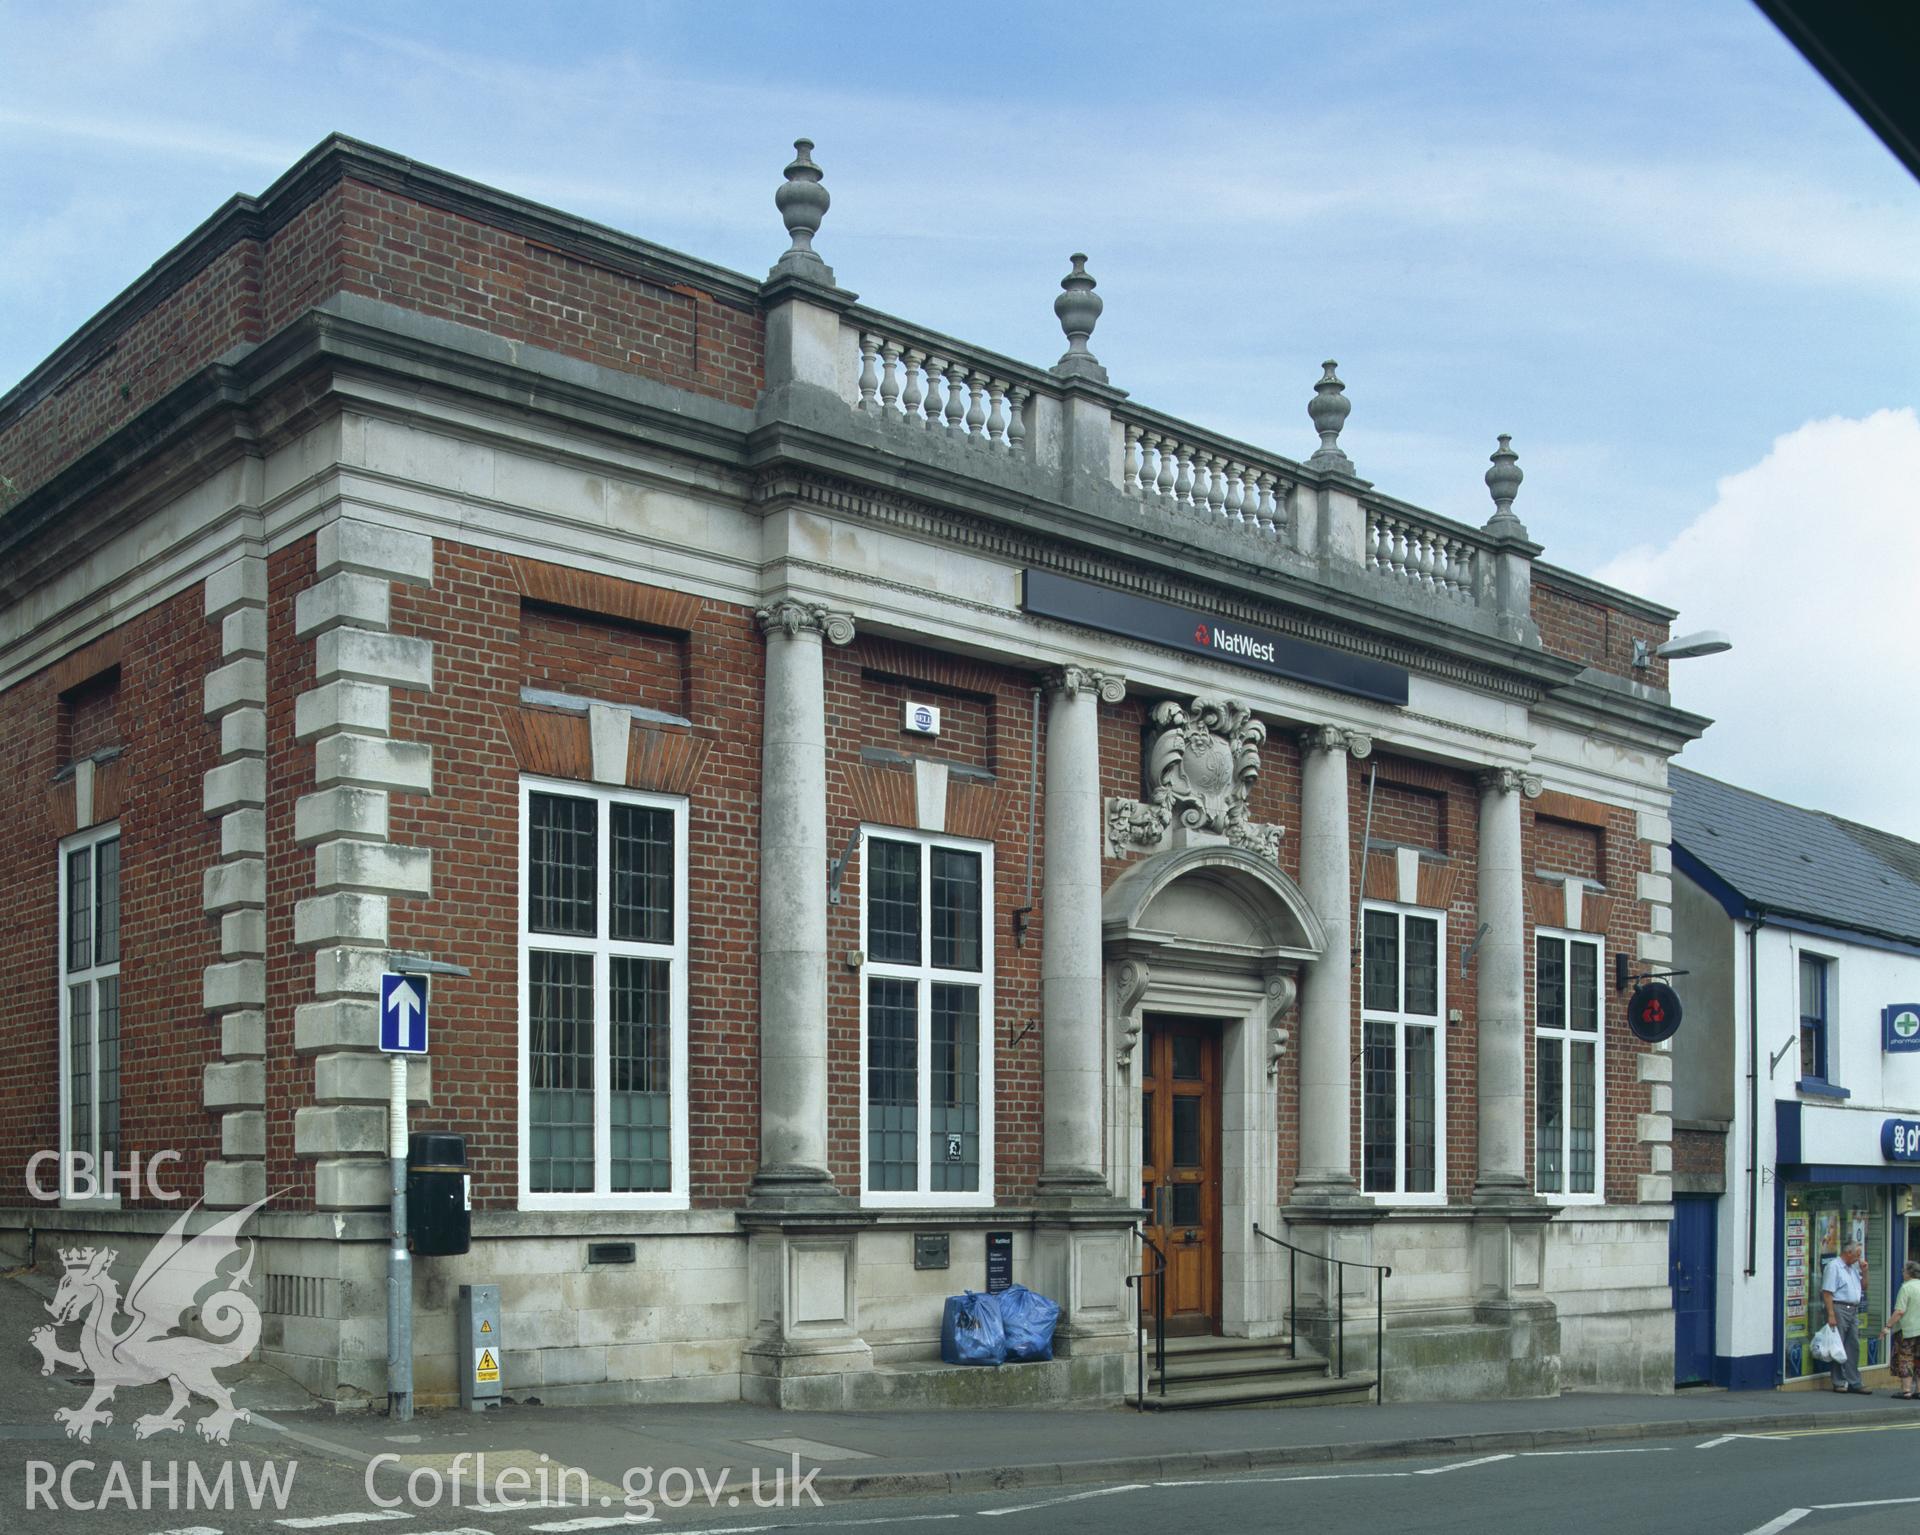 Colour transparency showing exterior view of Mational Westminster Bank, Llandeilo, produced by Iain Wright, June 2004.